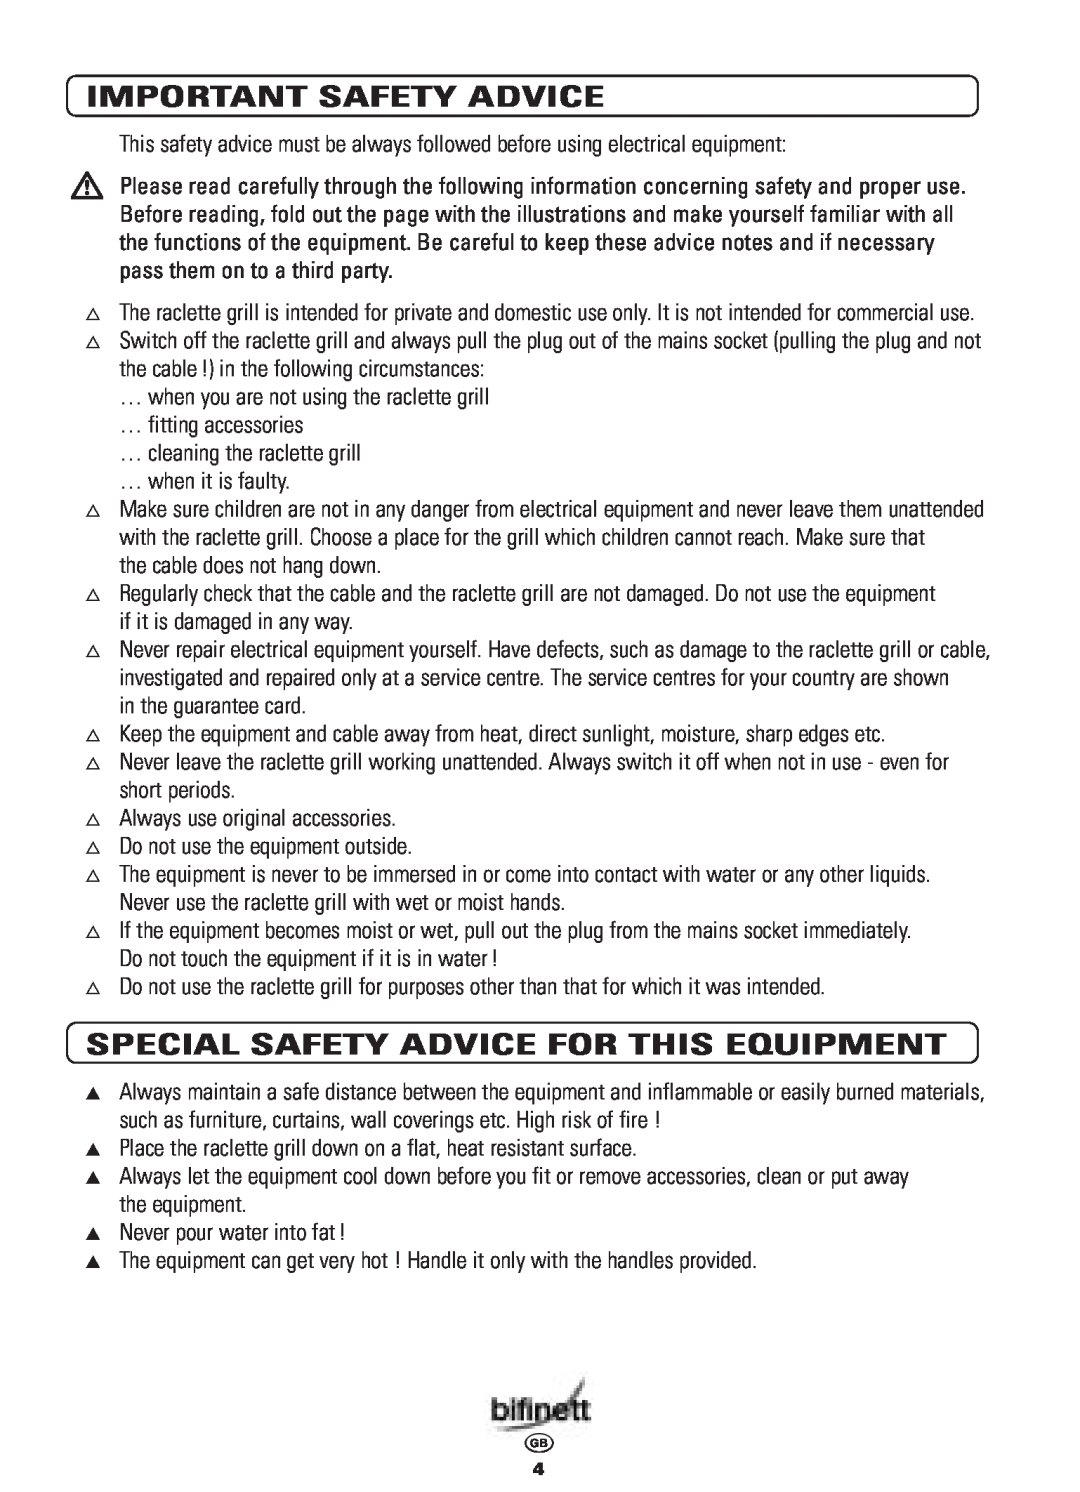 Bifinett KH 398 manual Important Safety Advice, Special Safety Advice For This Equipment 